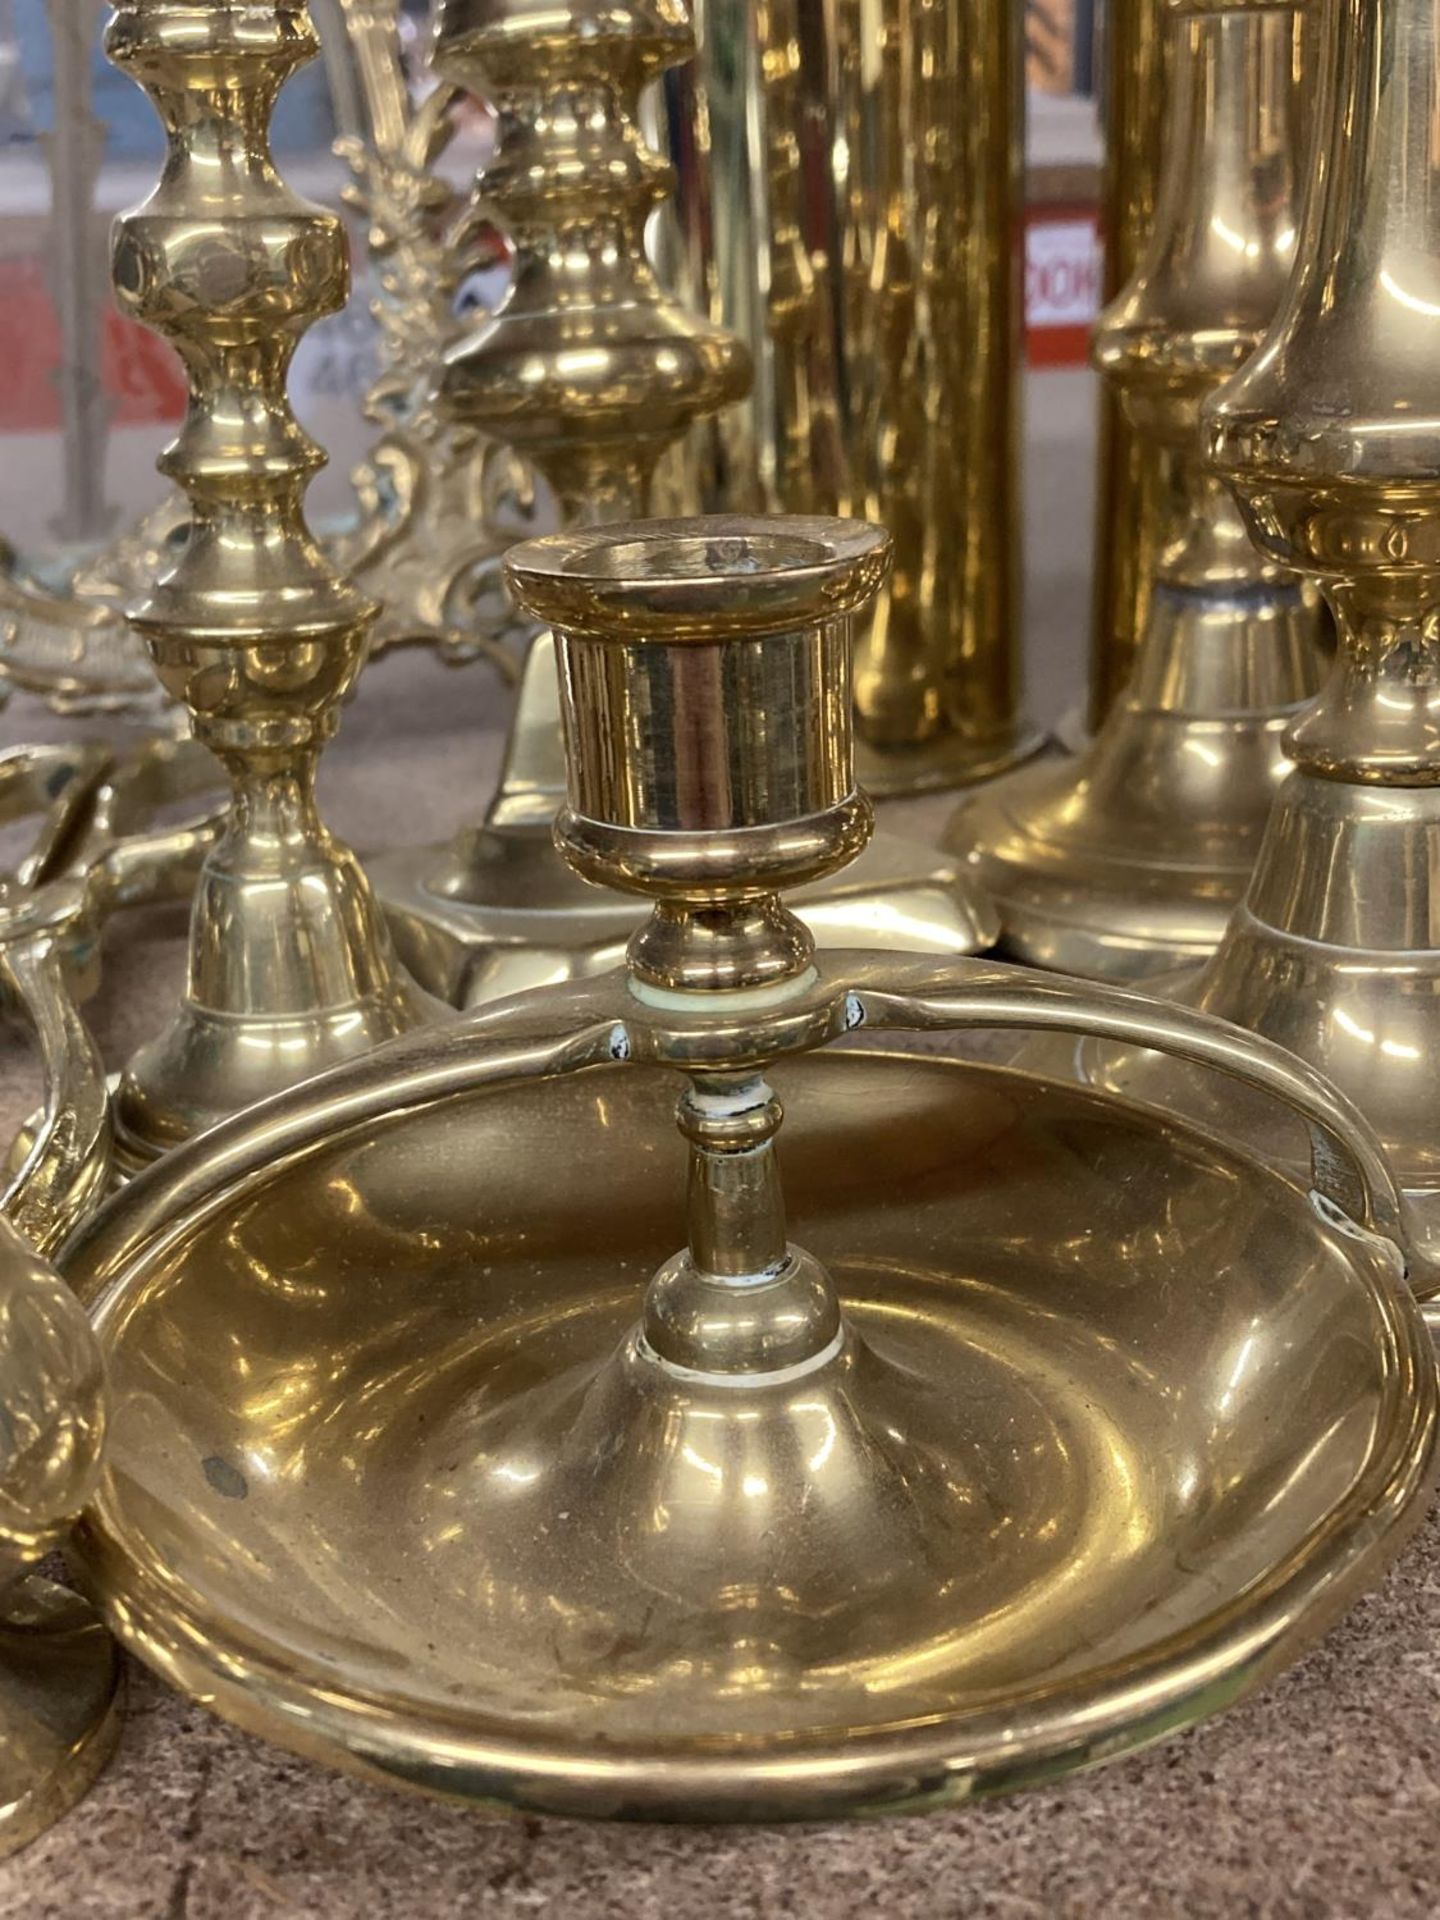 A QUANTITY OF BRASSWARE TO INCLUDE CANDLESTICKS, SHELL CASES, MIRROR, PHOTOGRAPH FRAME ETC - Image 3 of 4